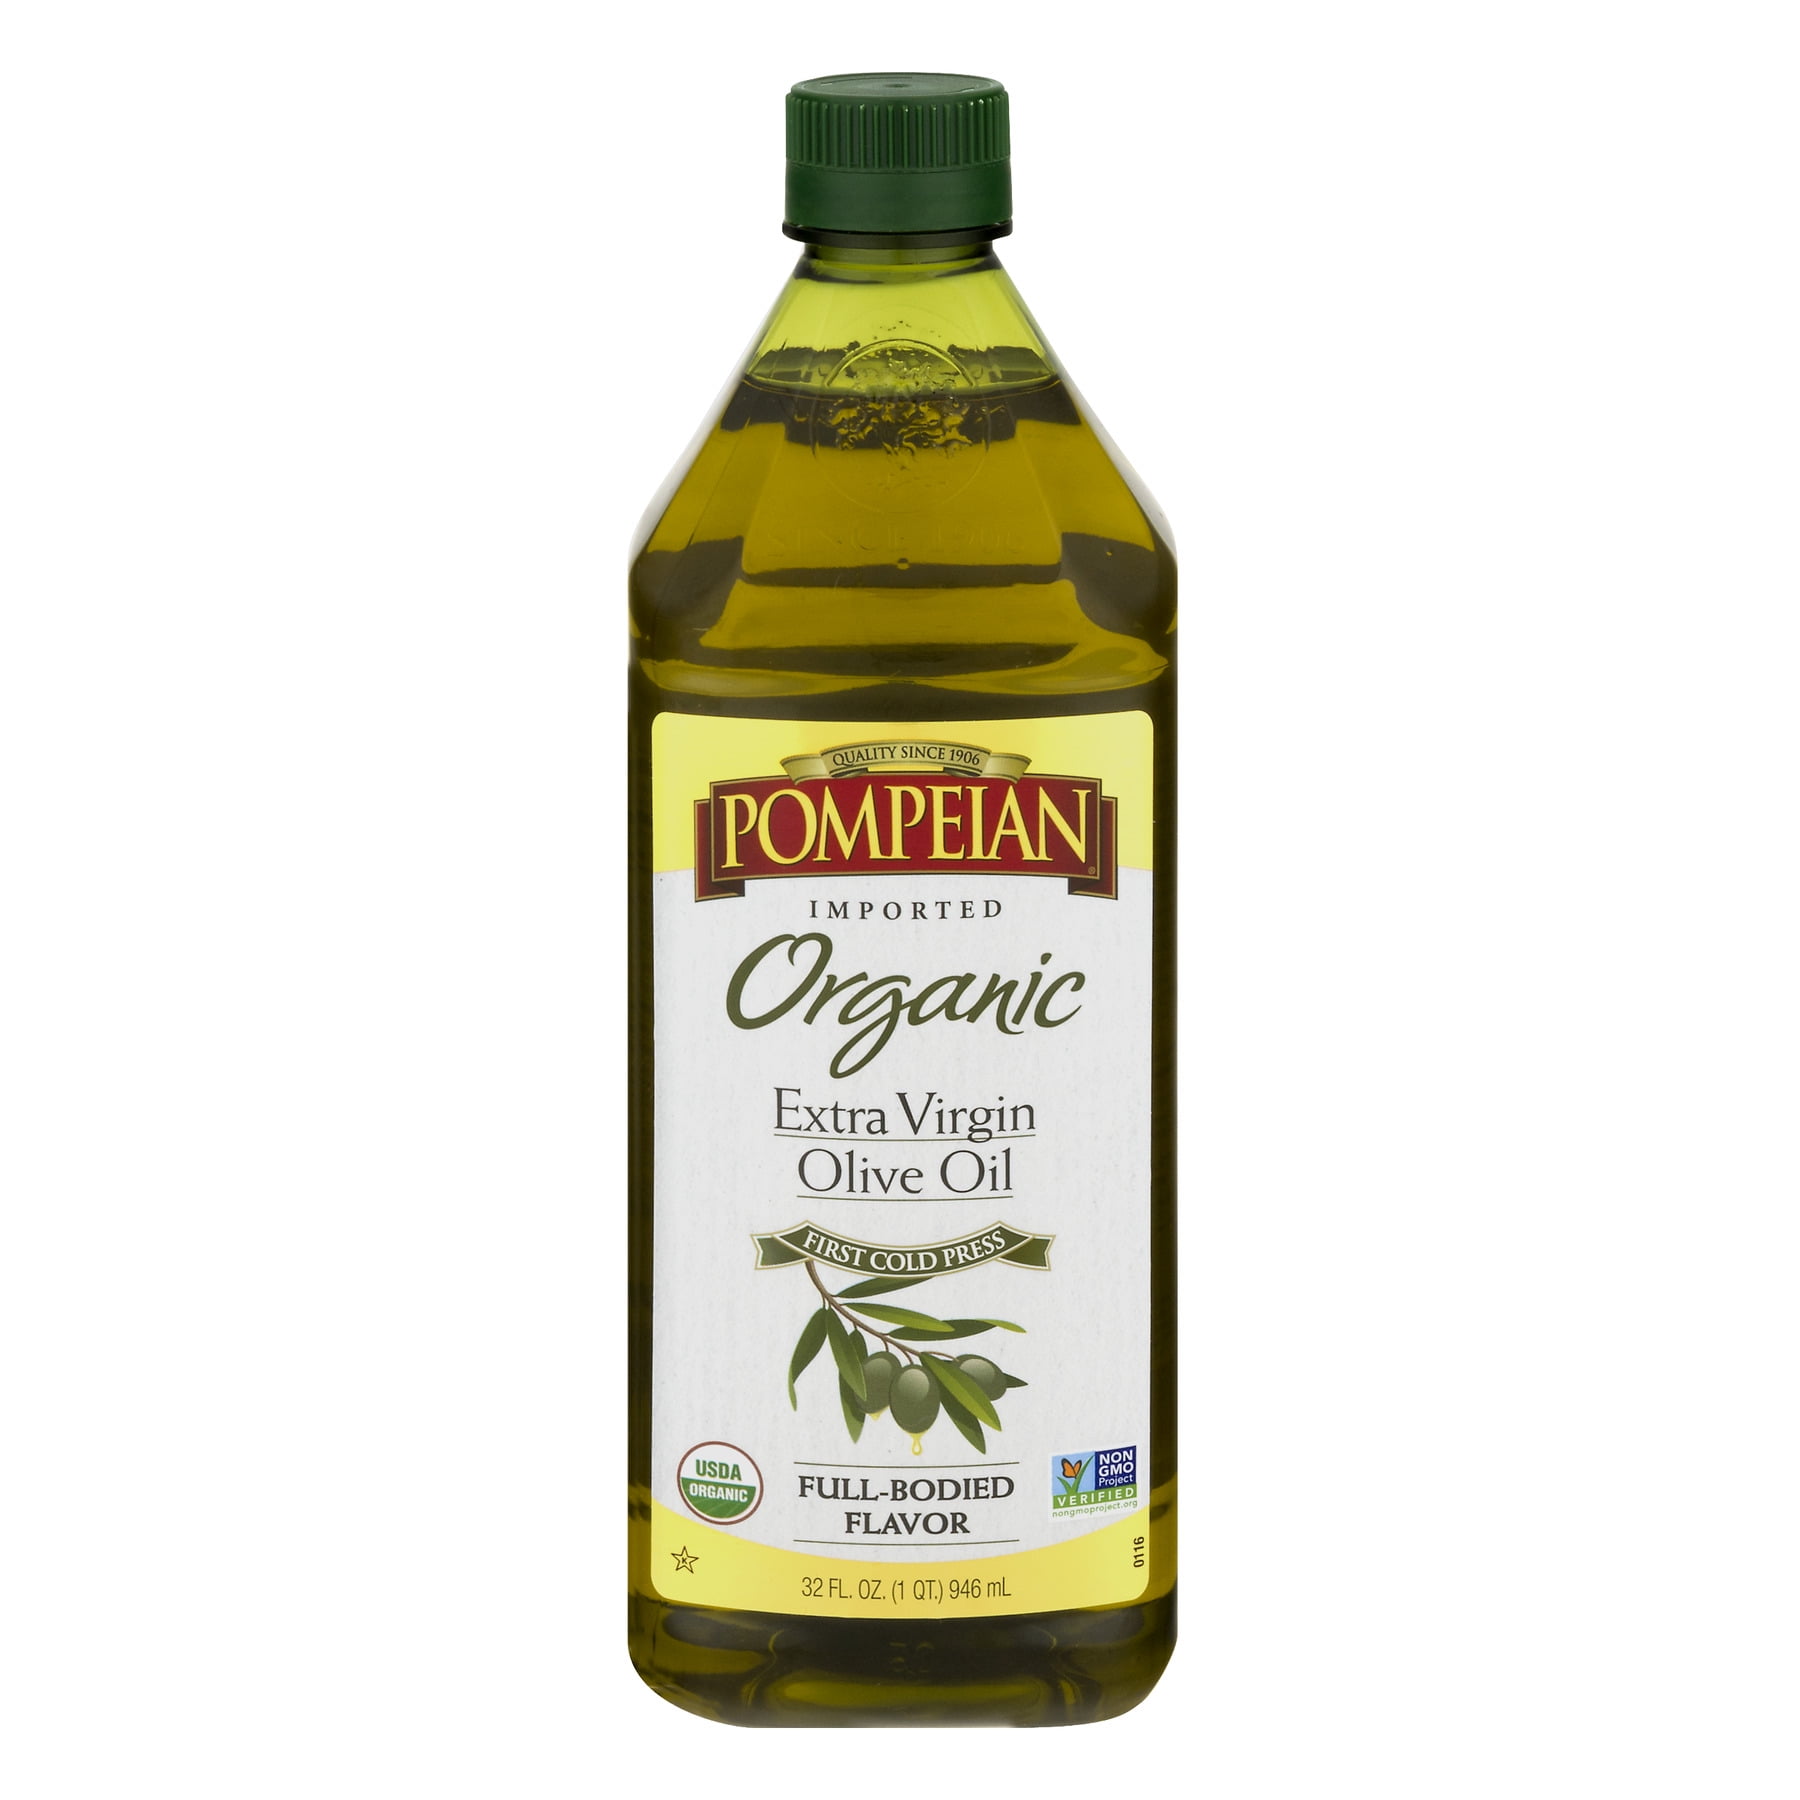 Extra Virgin Olive Oil. Оливковое масло Органик. Оливковое масло Карбонелл. Carbonell Olive Oil.